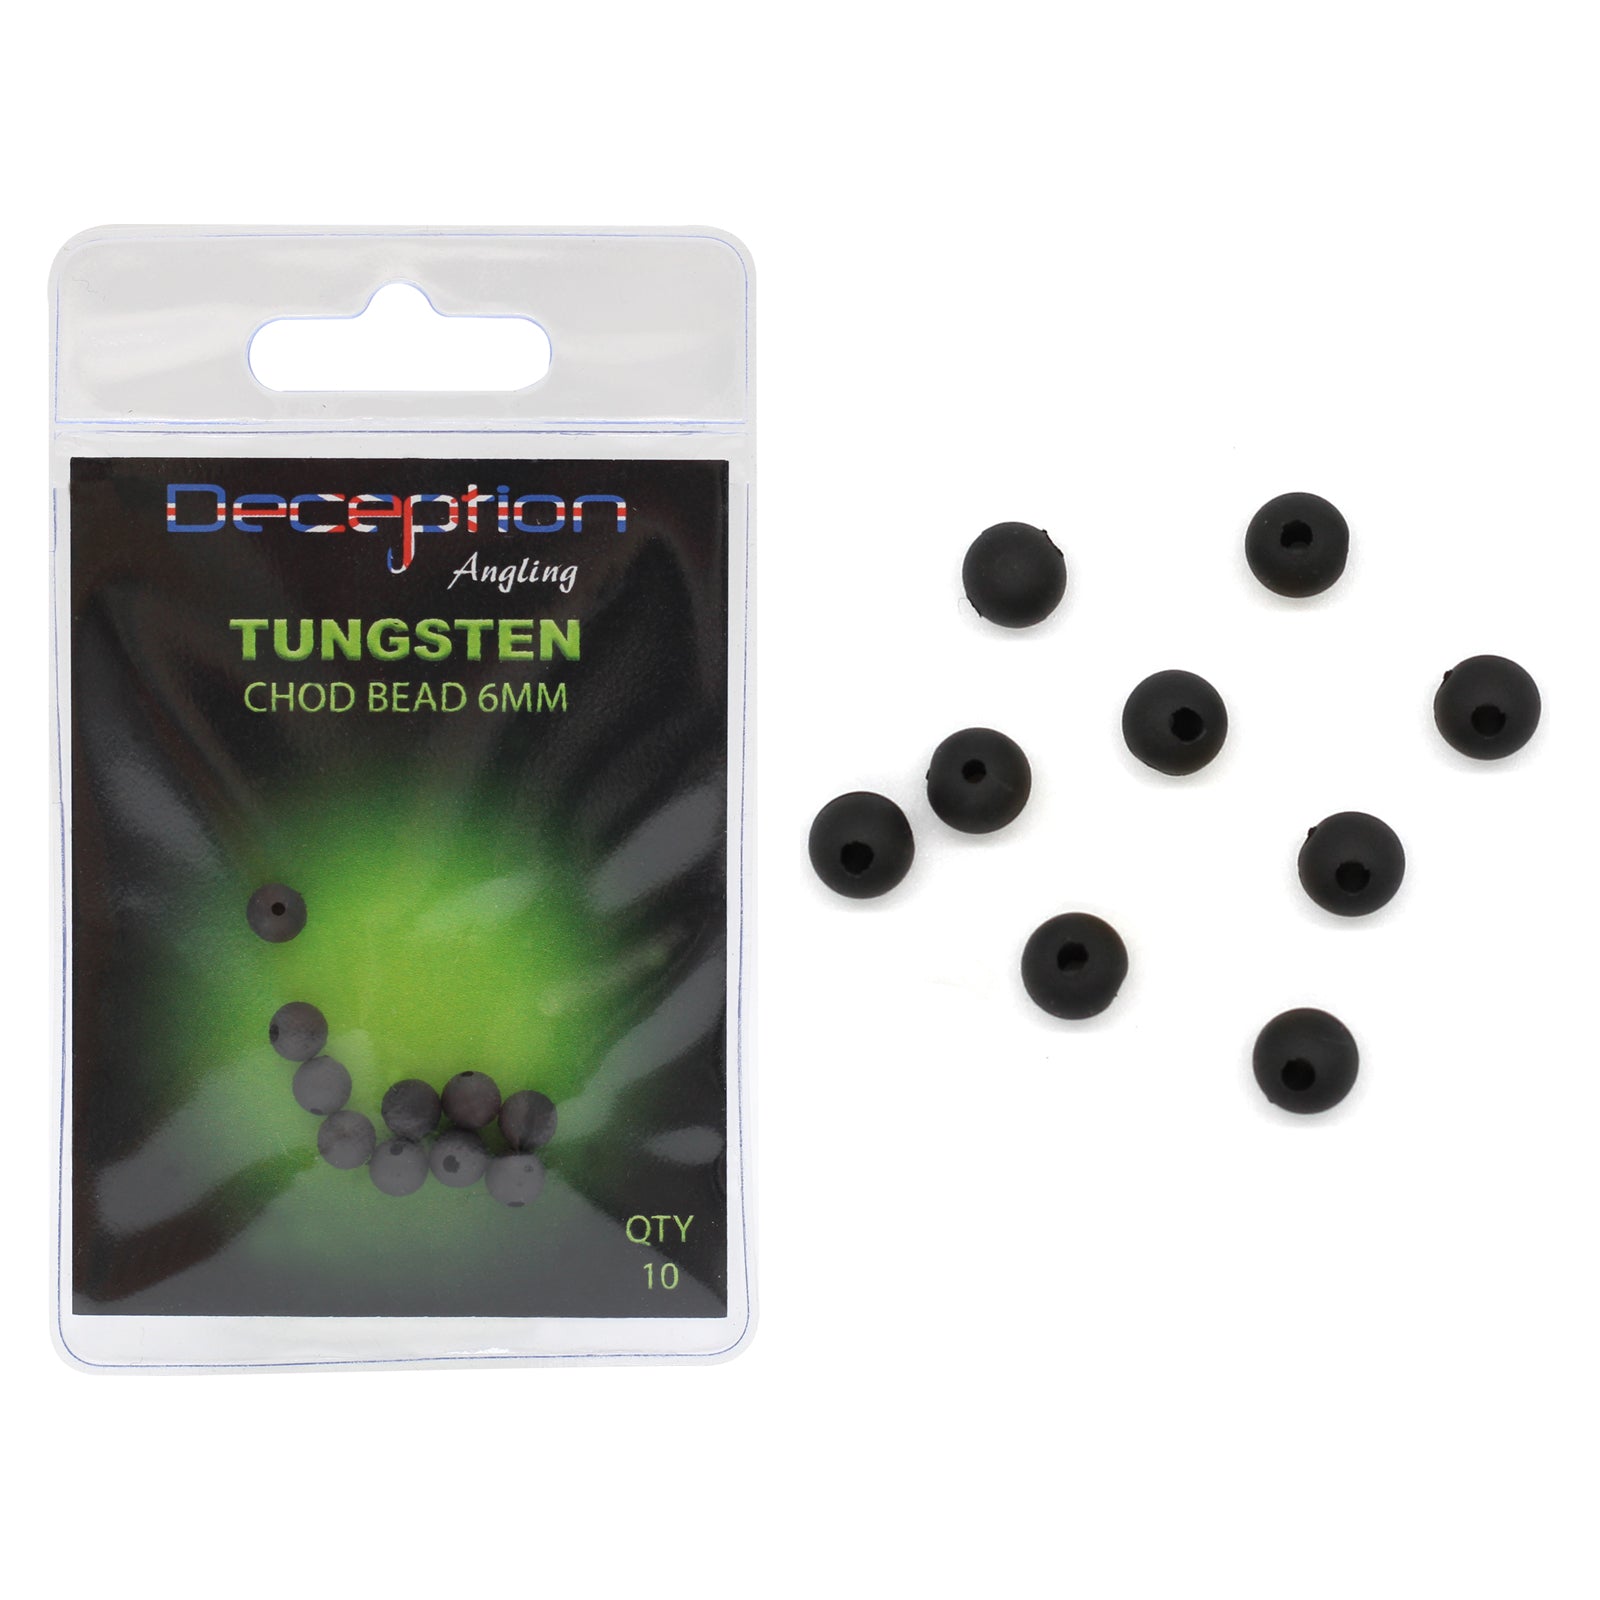 Deception Angling Tungsten Chod Beads 6mm for Fishing Pack of 10